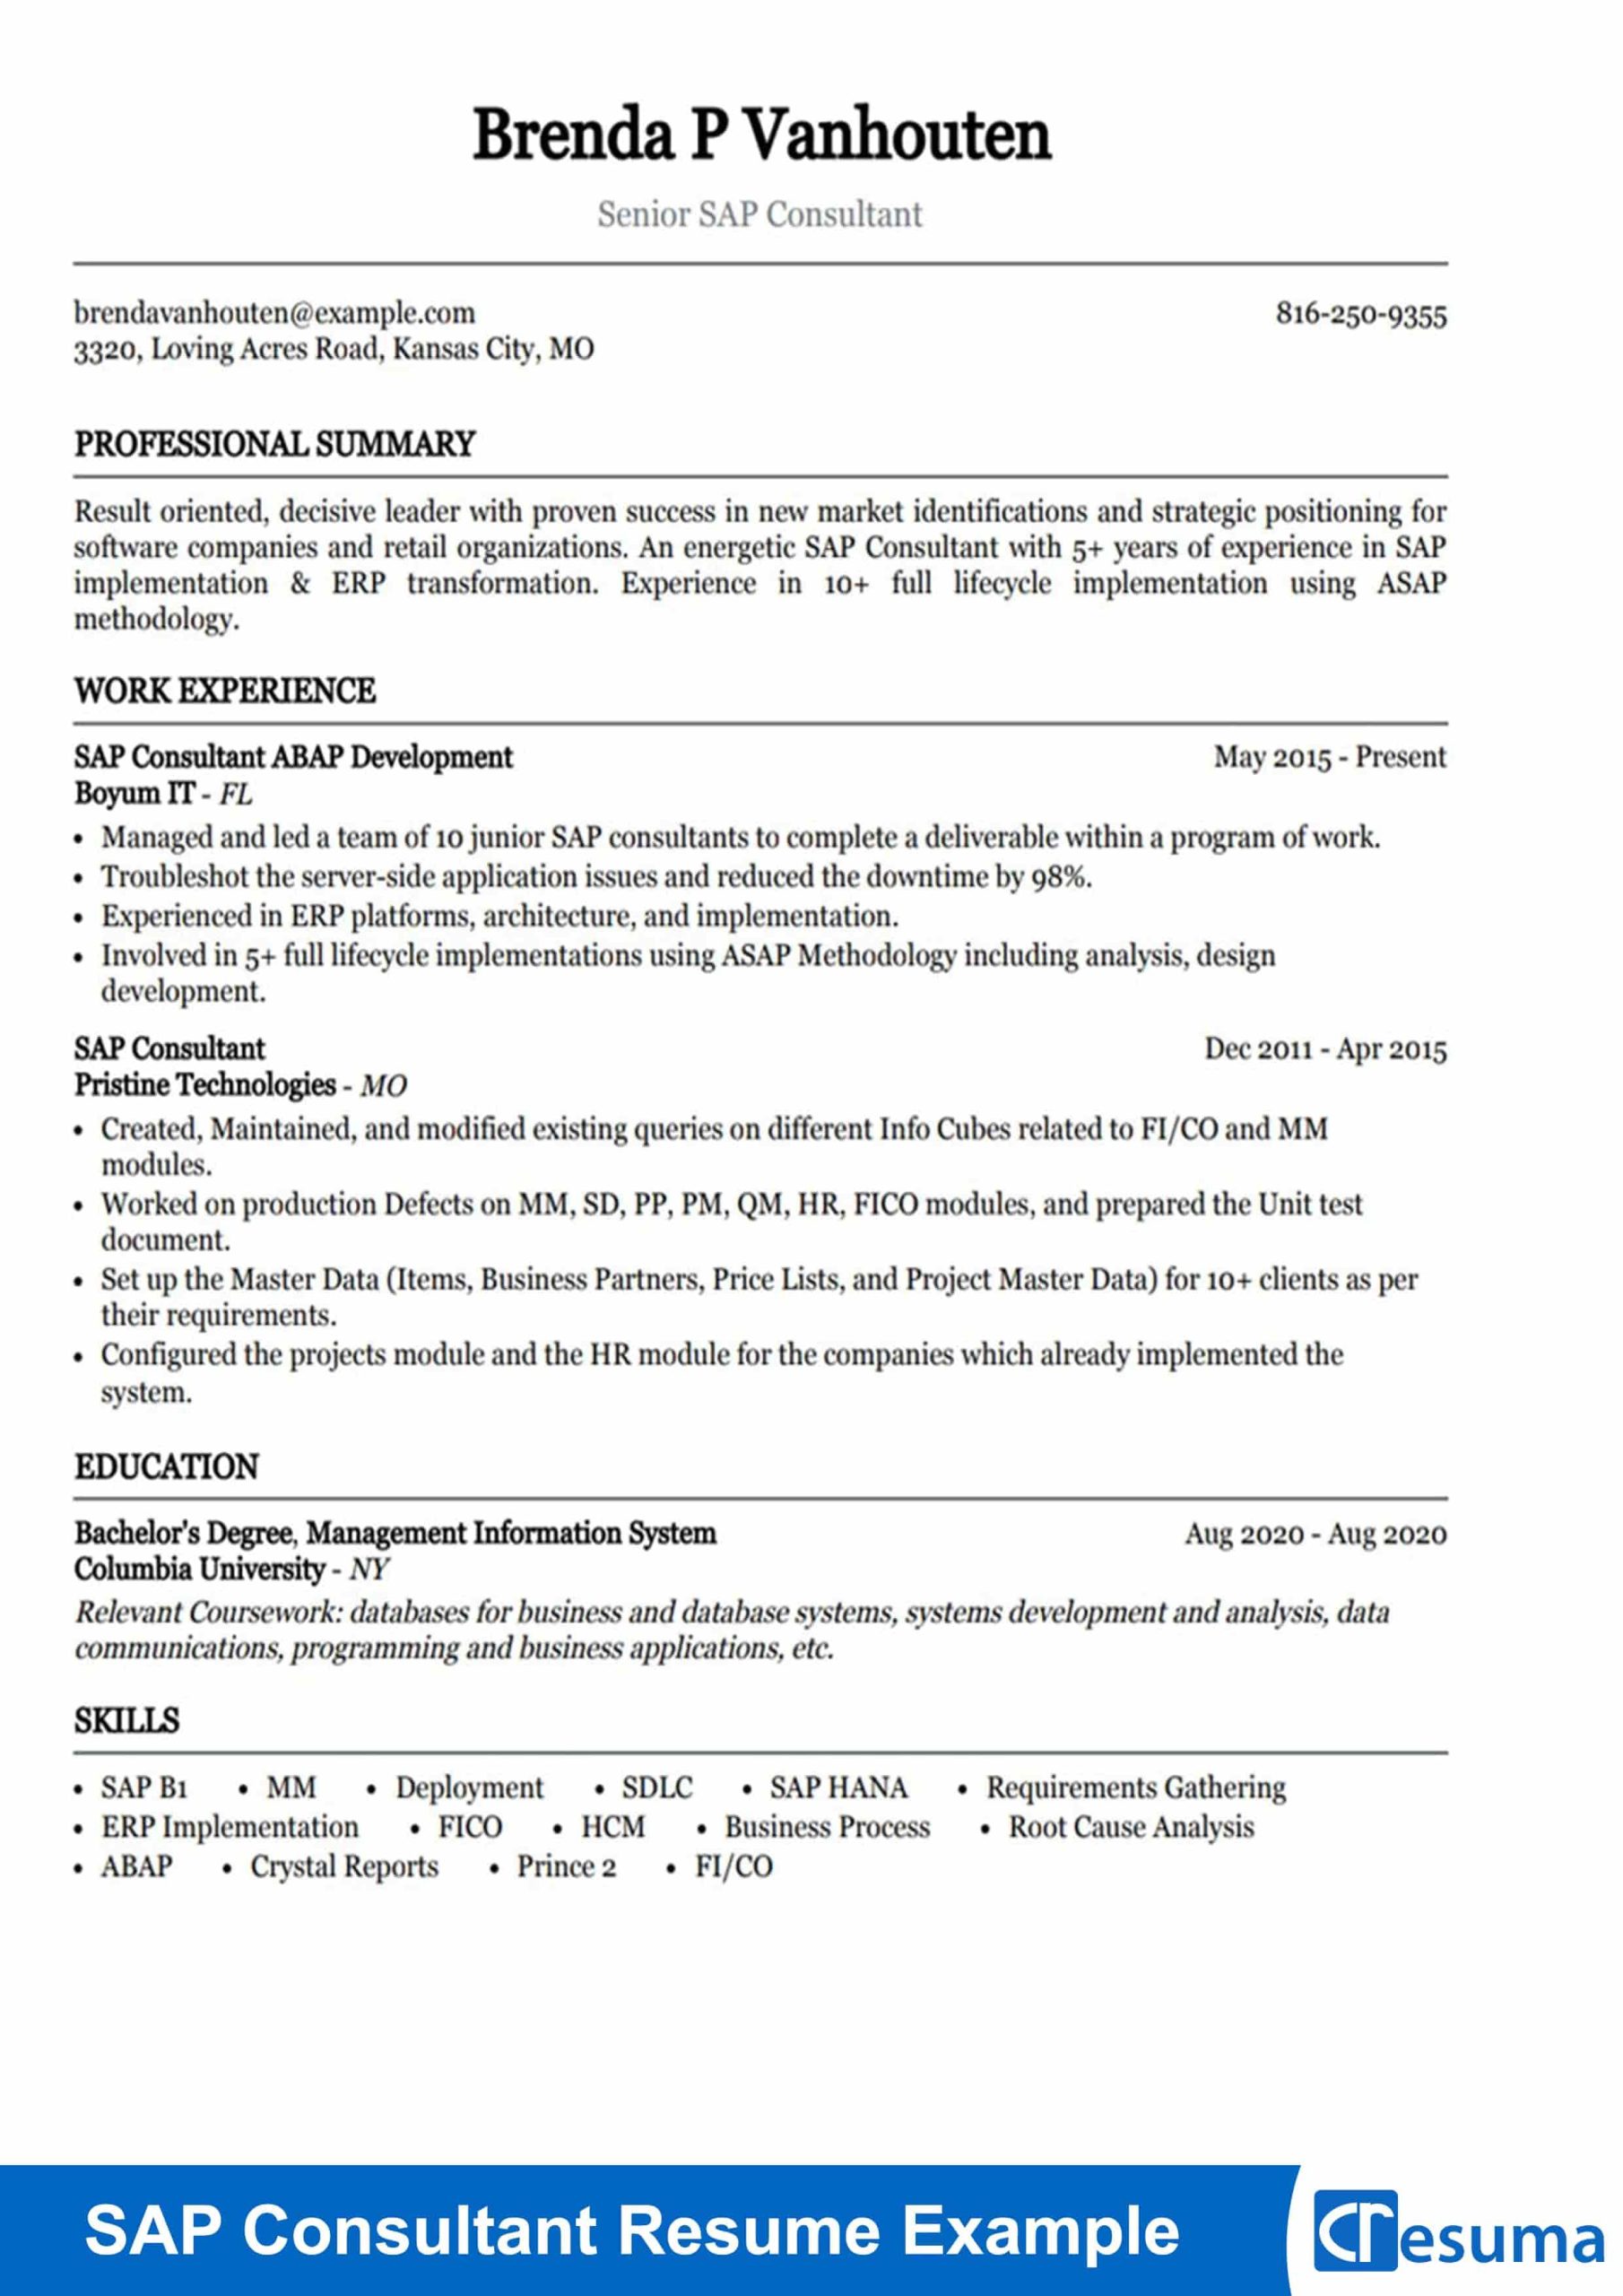 Sample Resume for Self Employed Consultant Resume Samples – Sap Consultant Resume Example